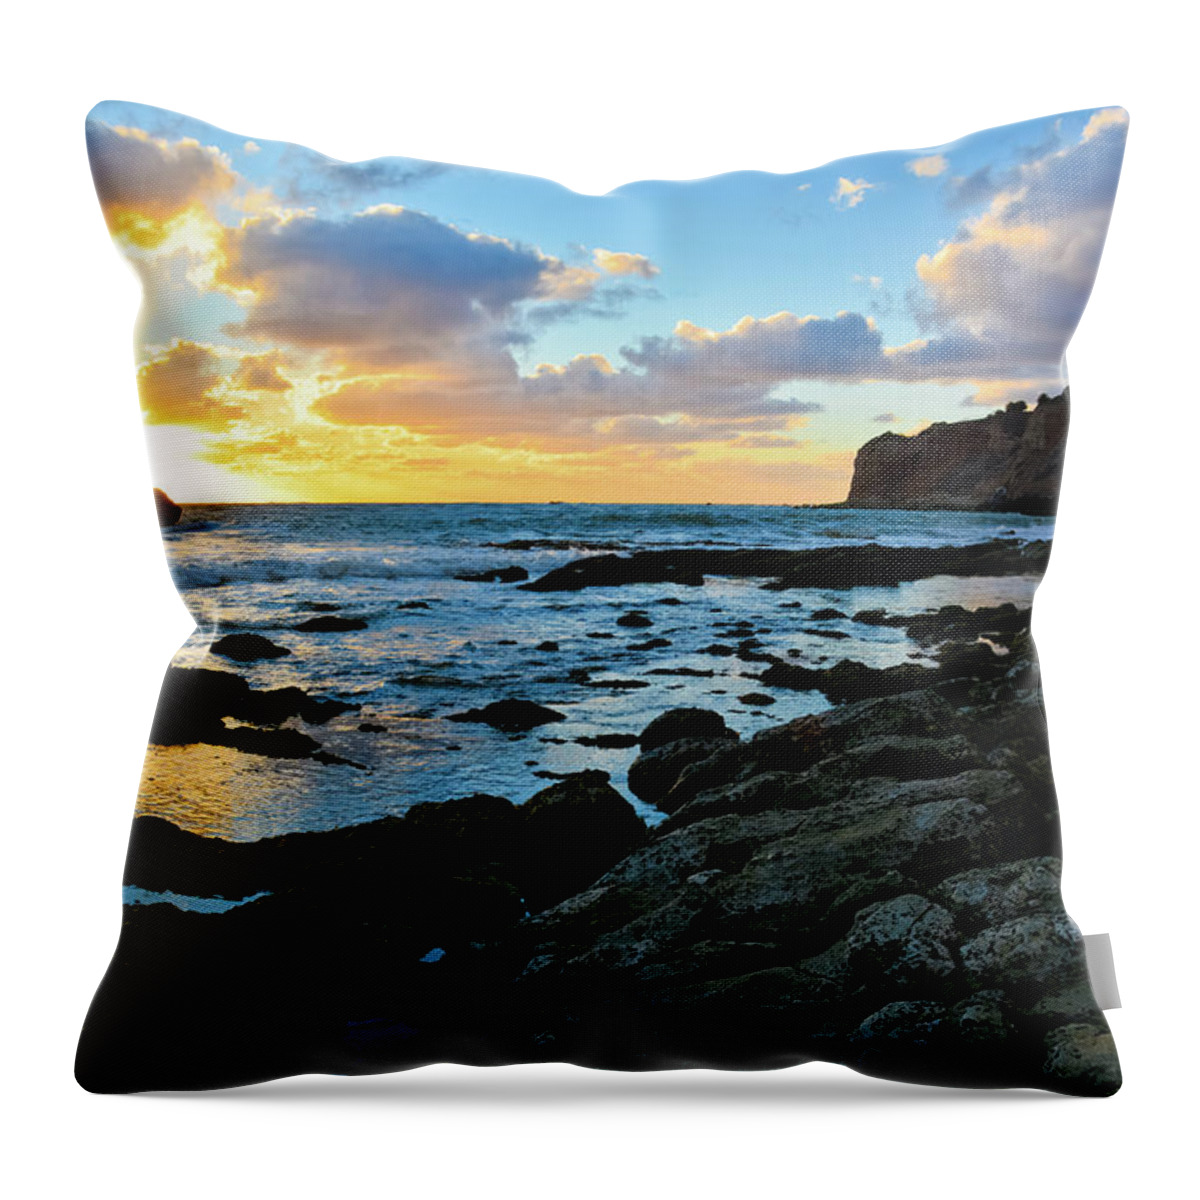 Los Angeles Throw Pillow featuring the photograph Sunset Pelican Cove by Kyle Hanson